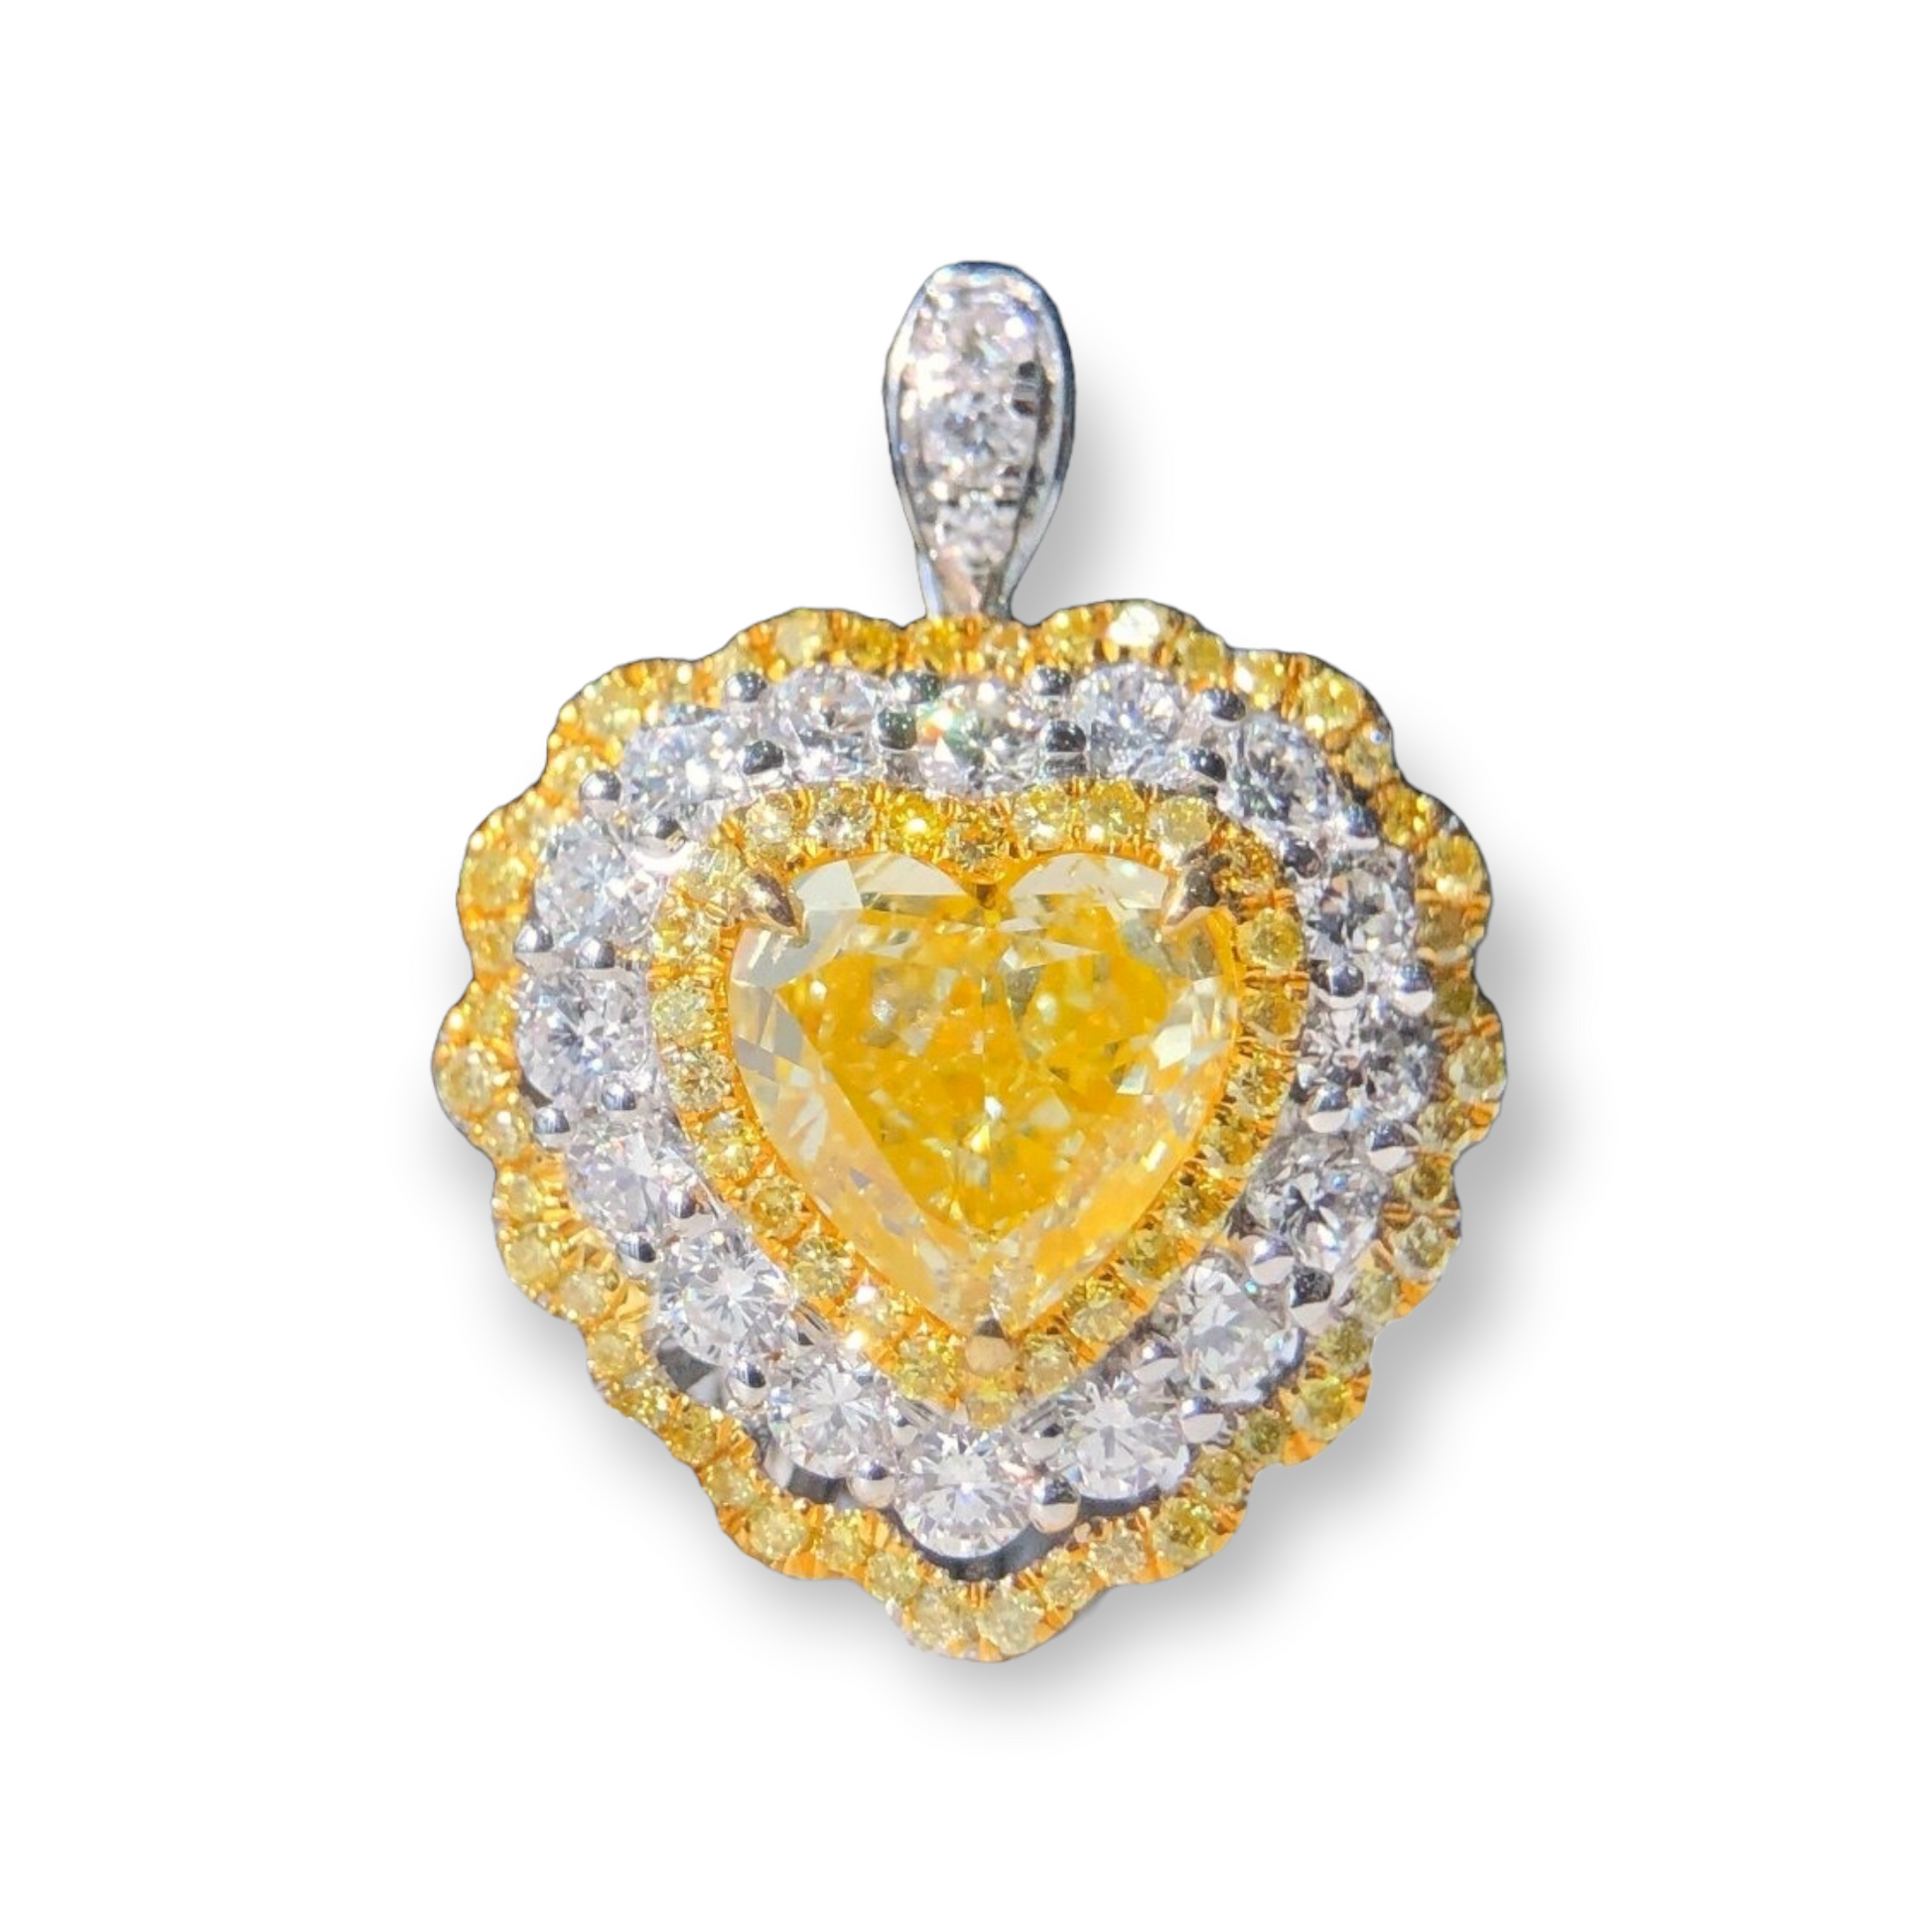 ZUPSTYLE 1 CT. Heart Yellow Diamond Ring in 18K White Gold